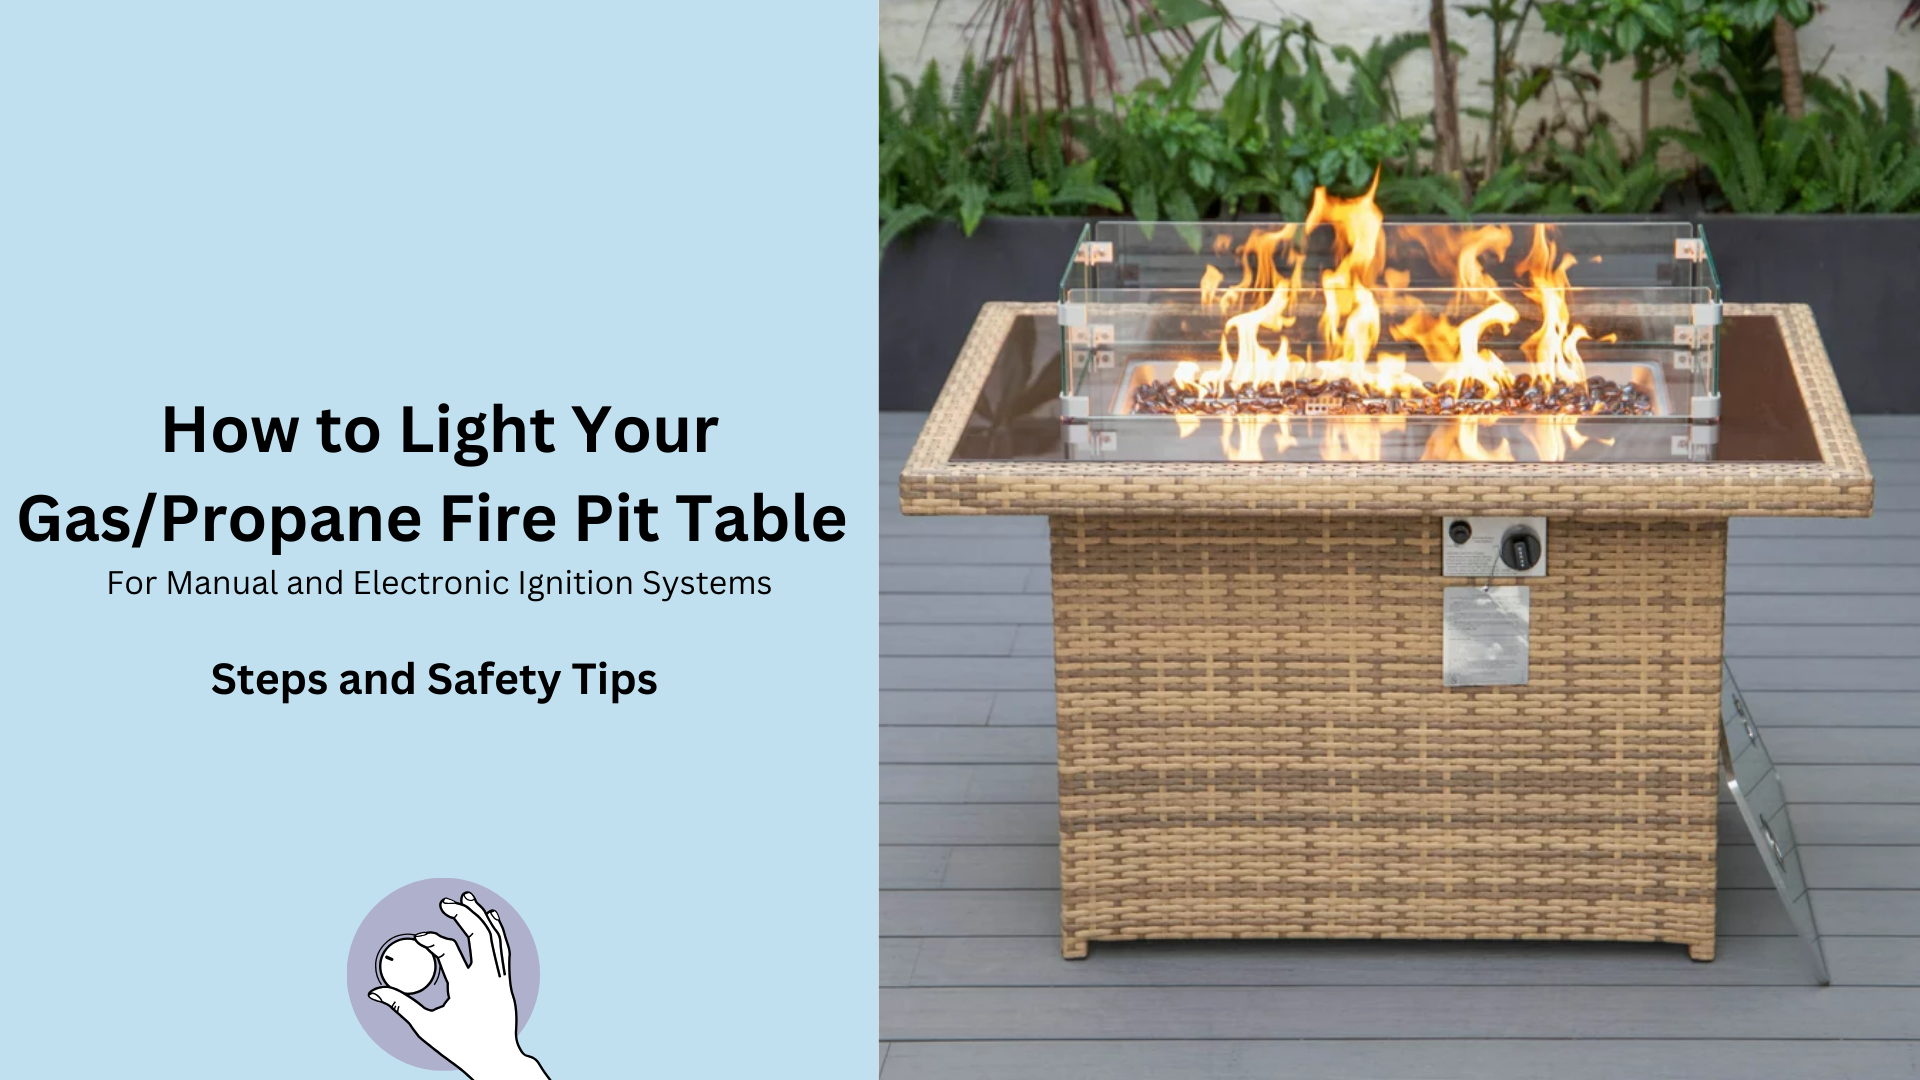 How to light a propane fire pit